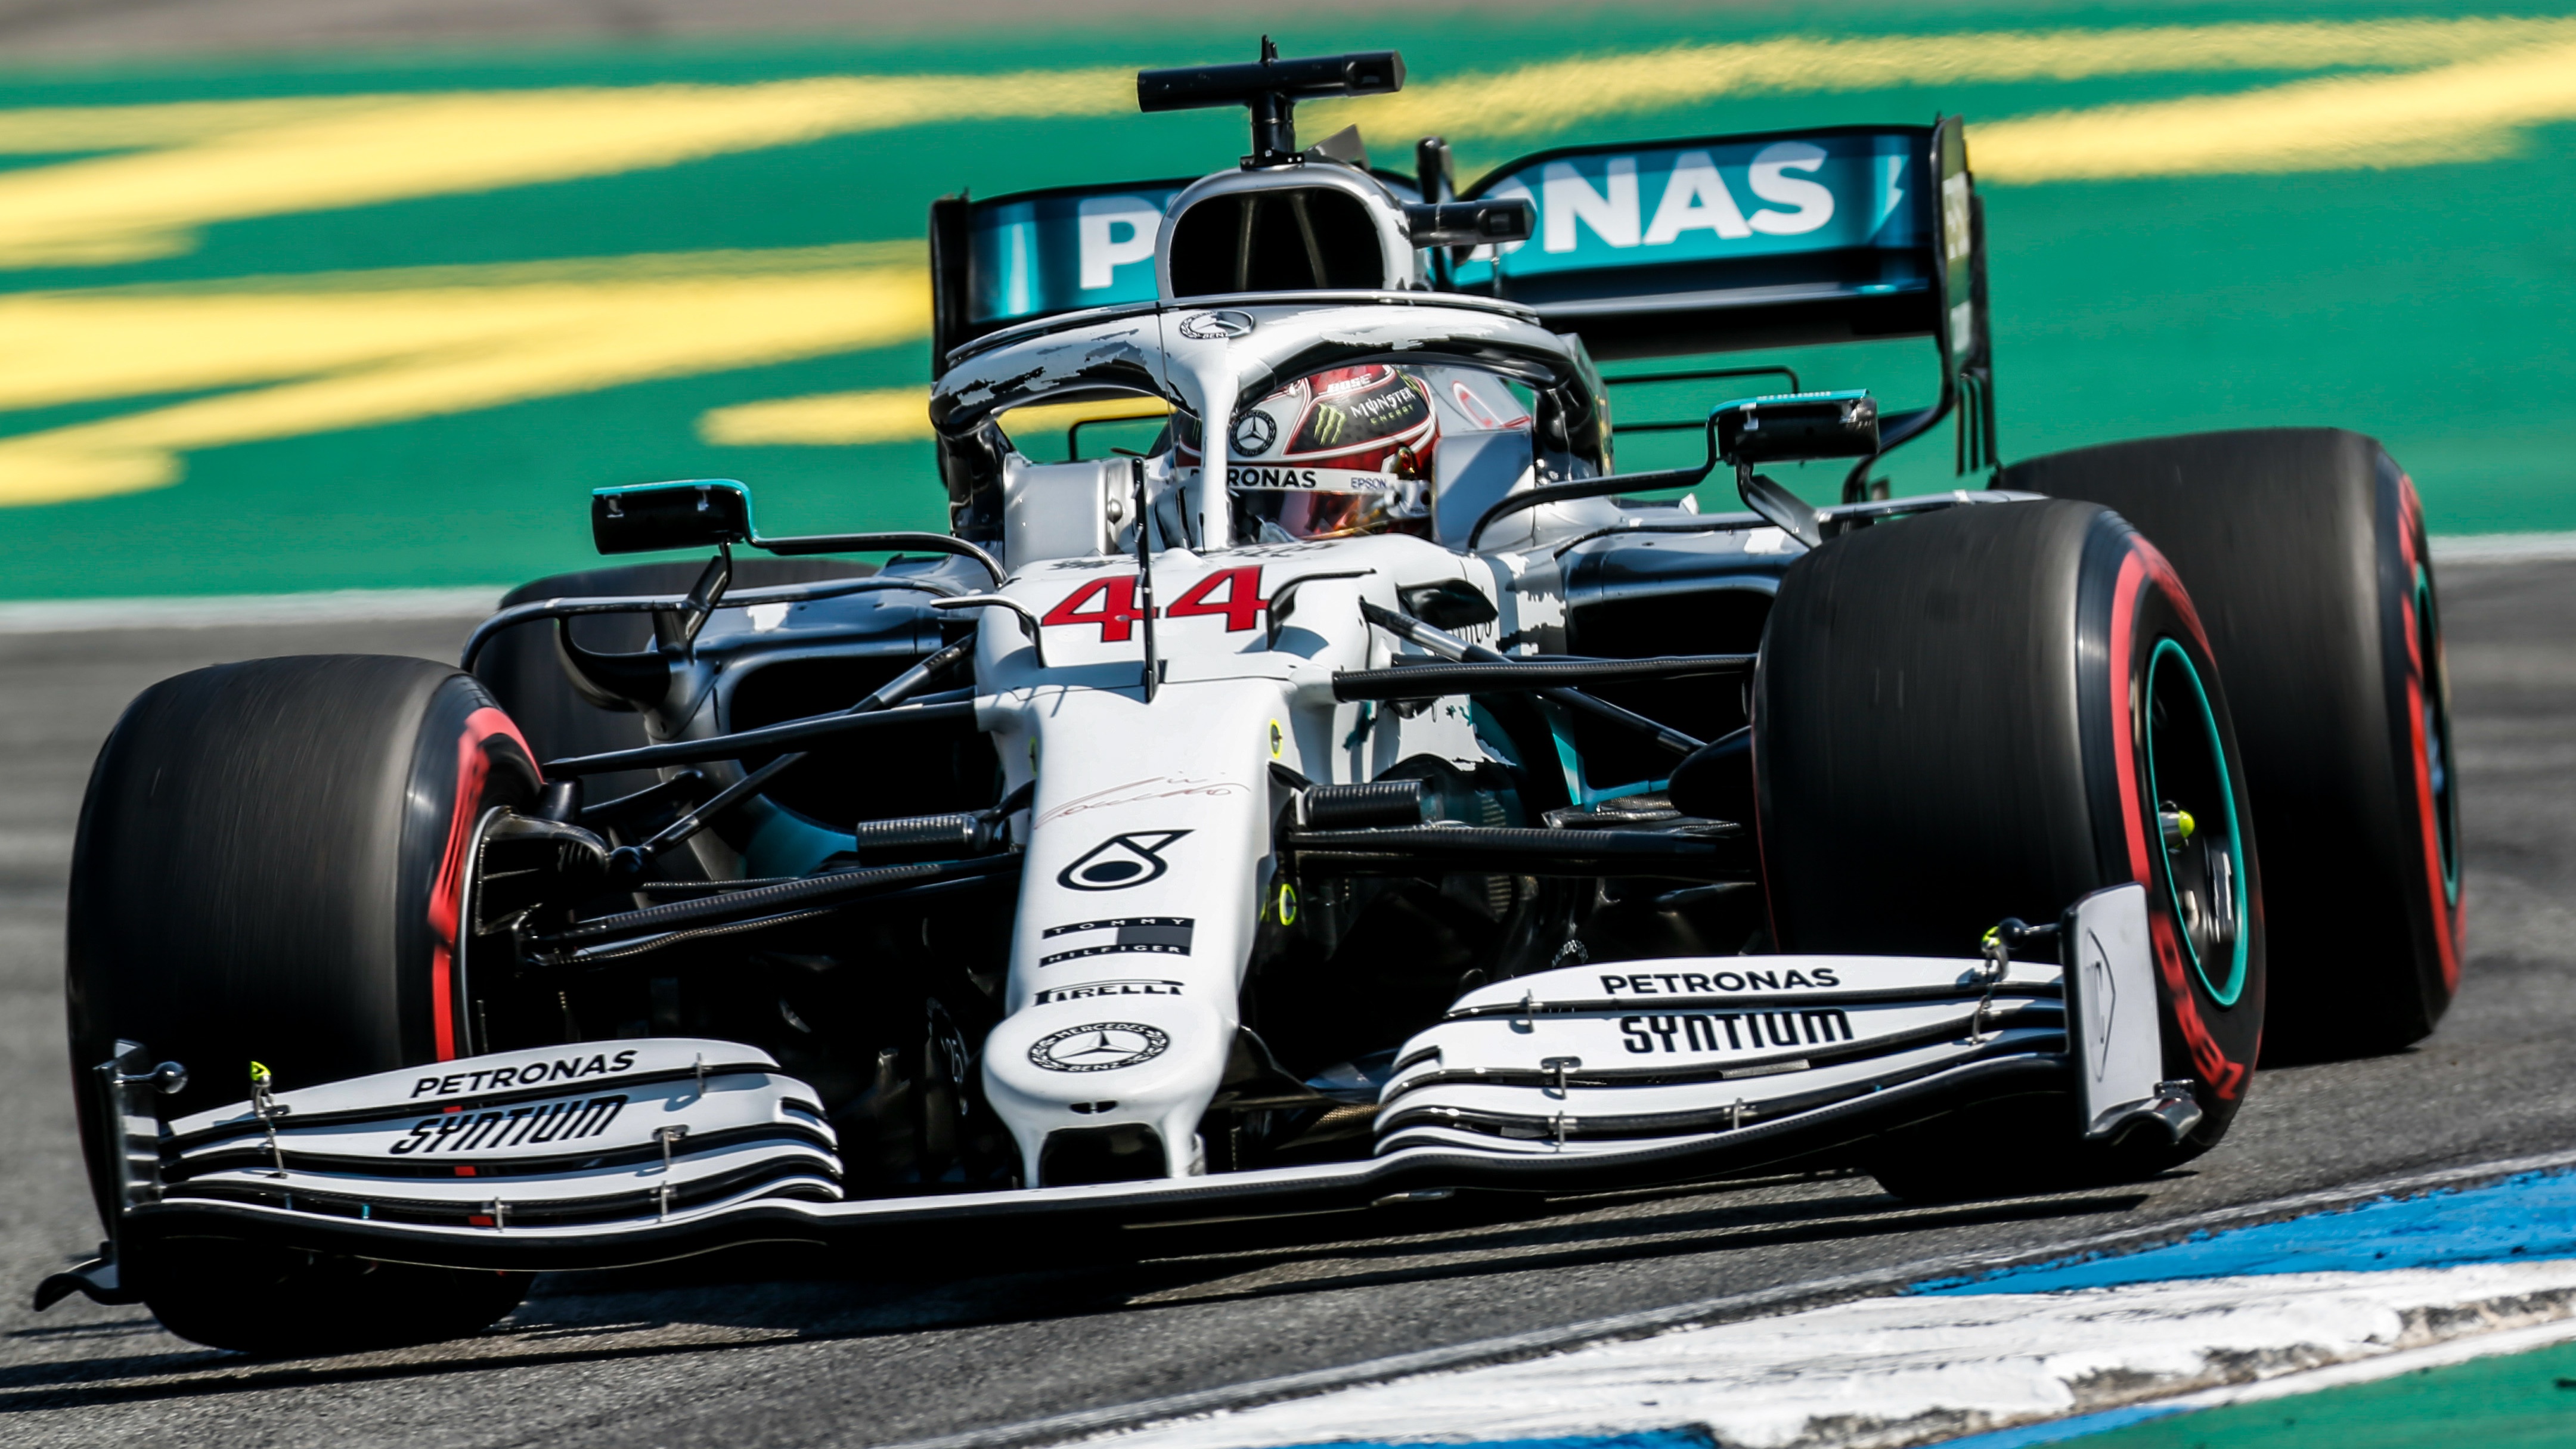 News Mercedes Amg Rumoured To Leave Formula One After 2020